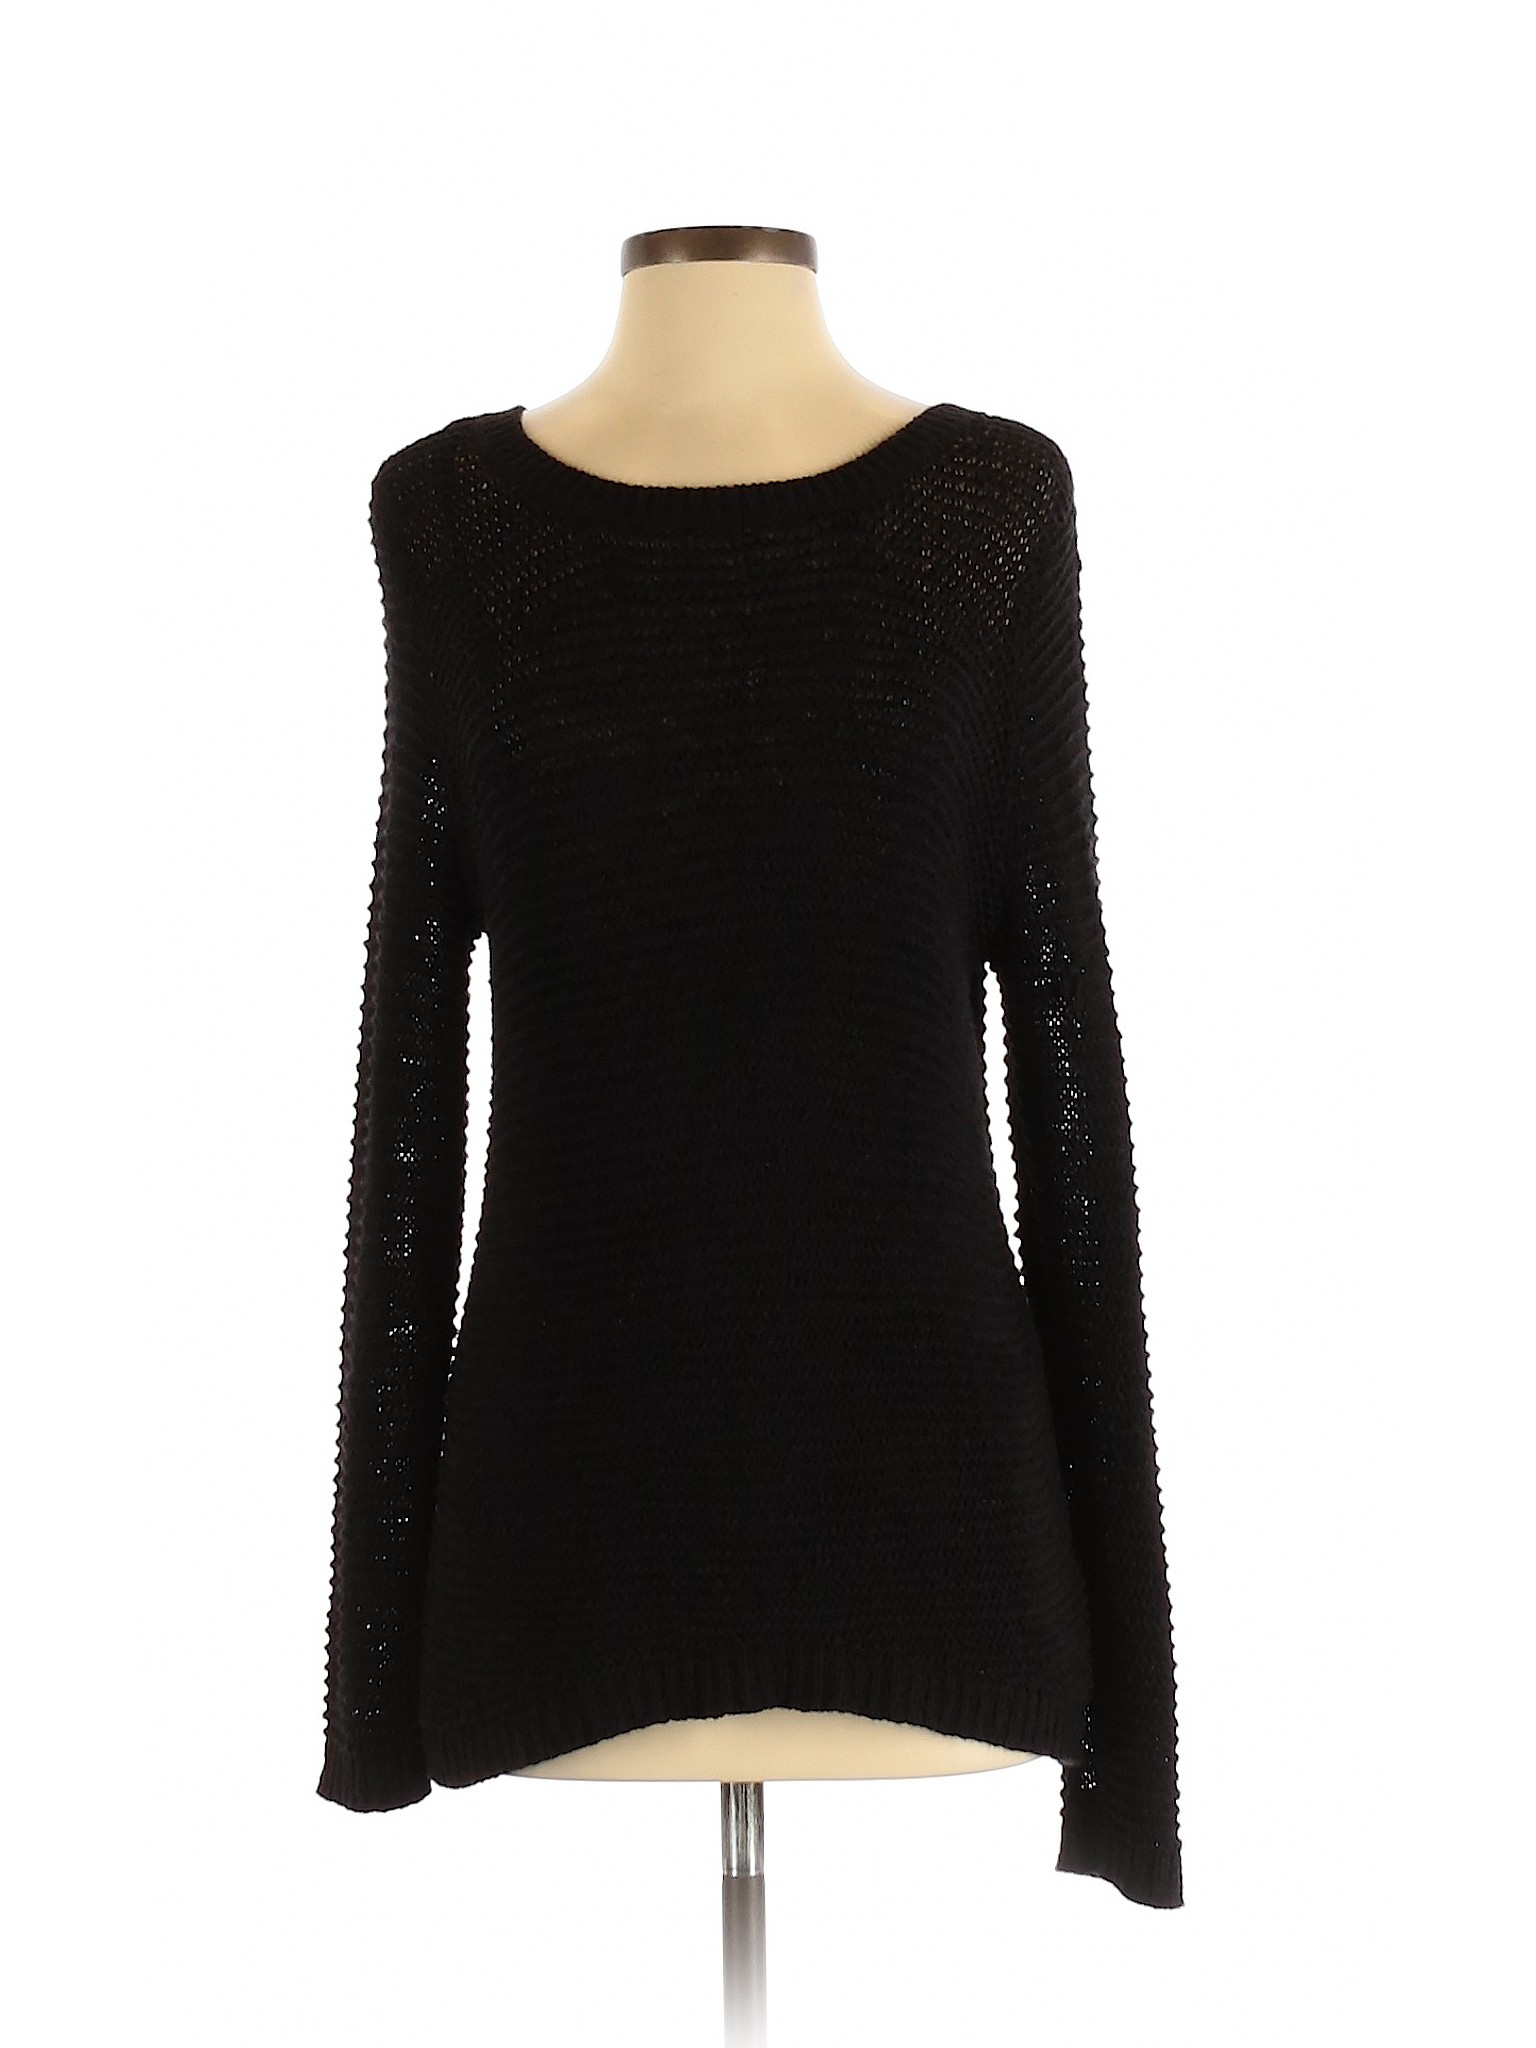 Divided by H&M Women Black Pullover Sweater S | eBay